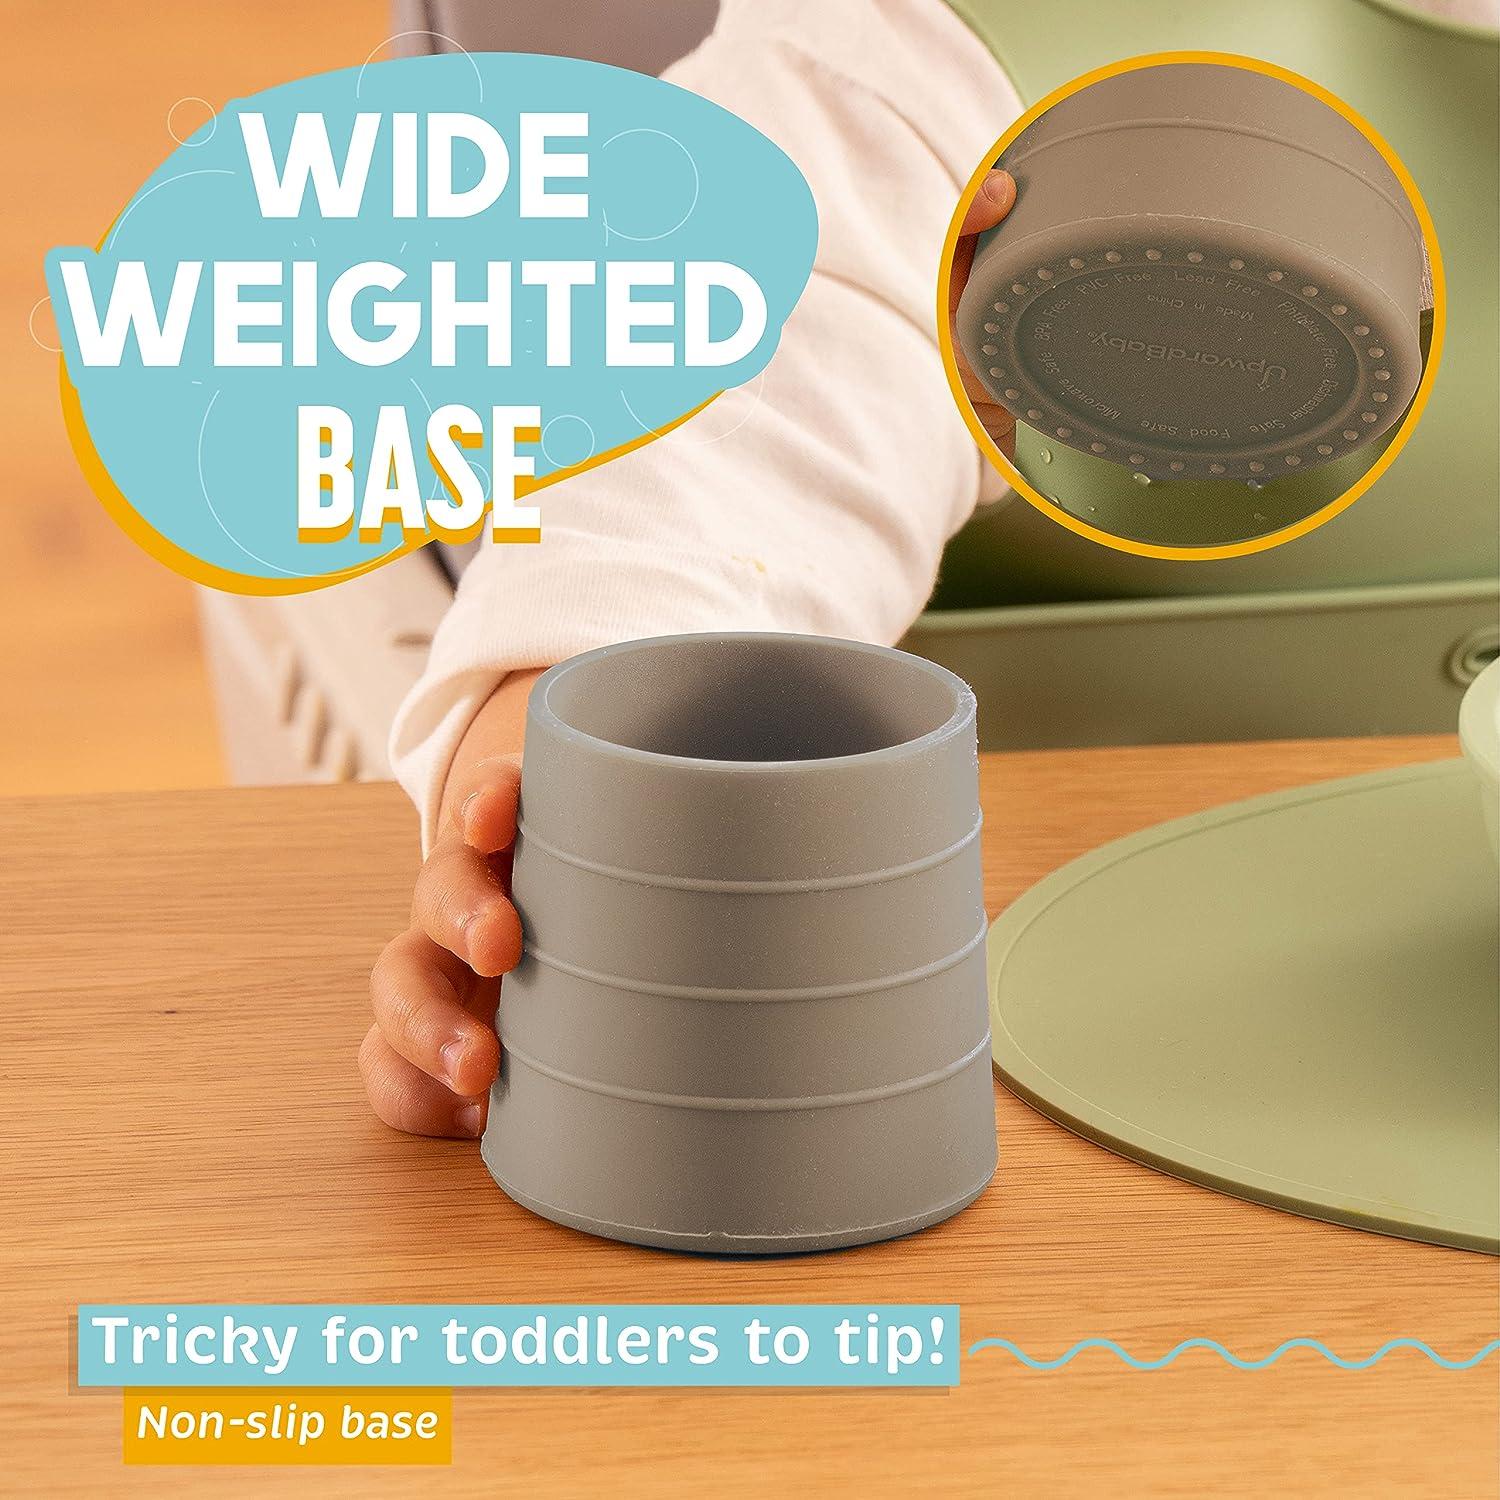  Upward Baby Led Weaning Supplies - Suction Plates for